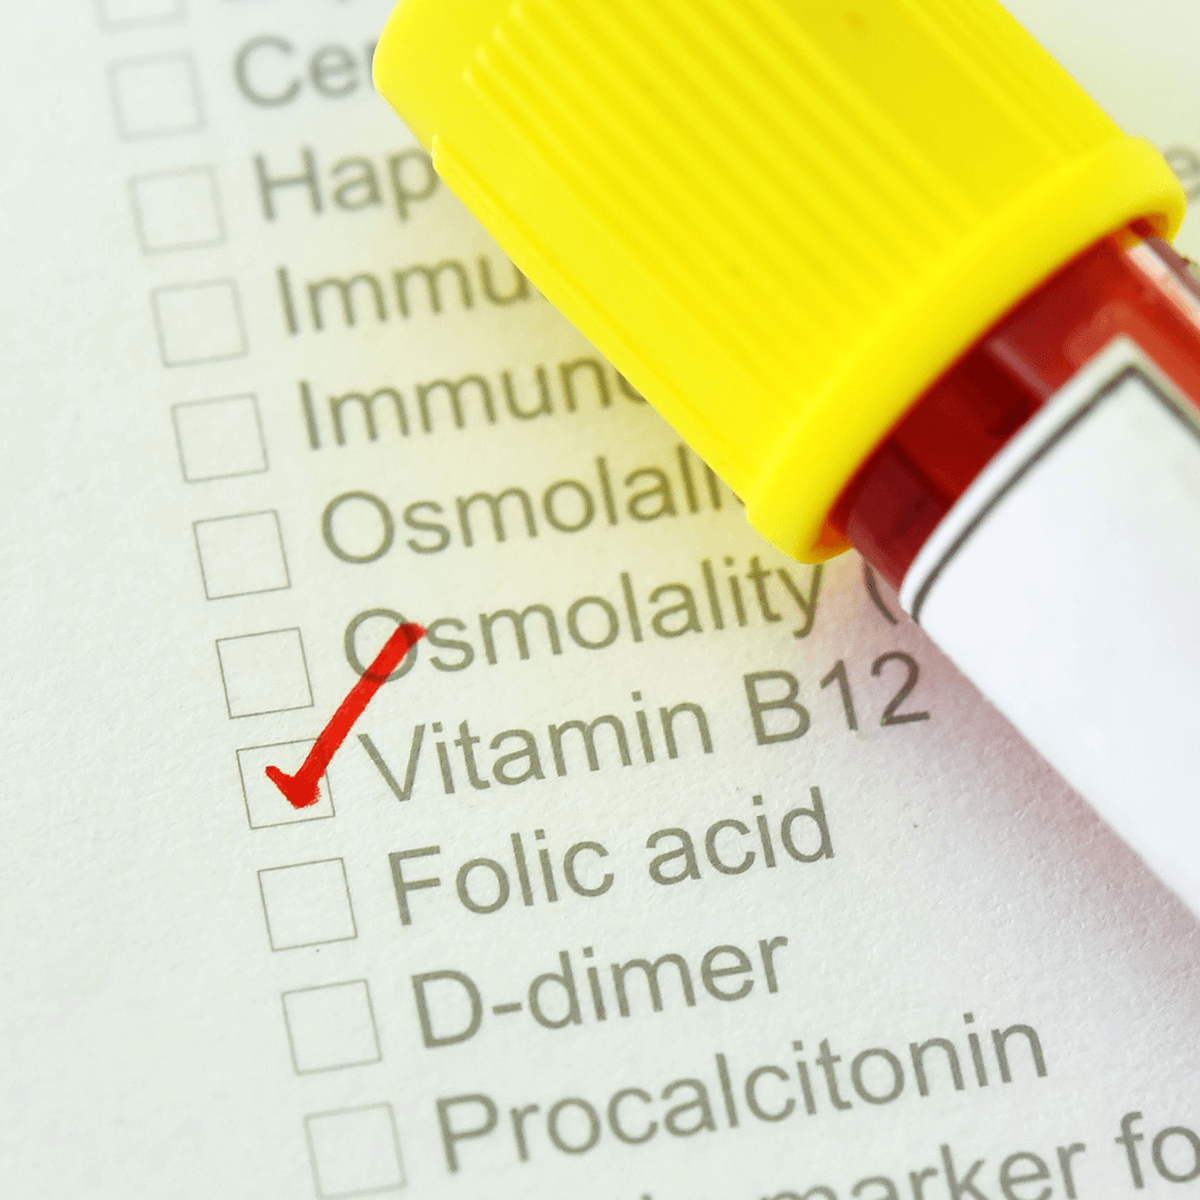 Image of checklist showing Vitamin B12 needed